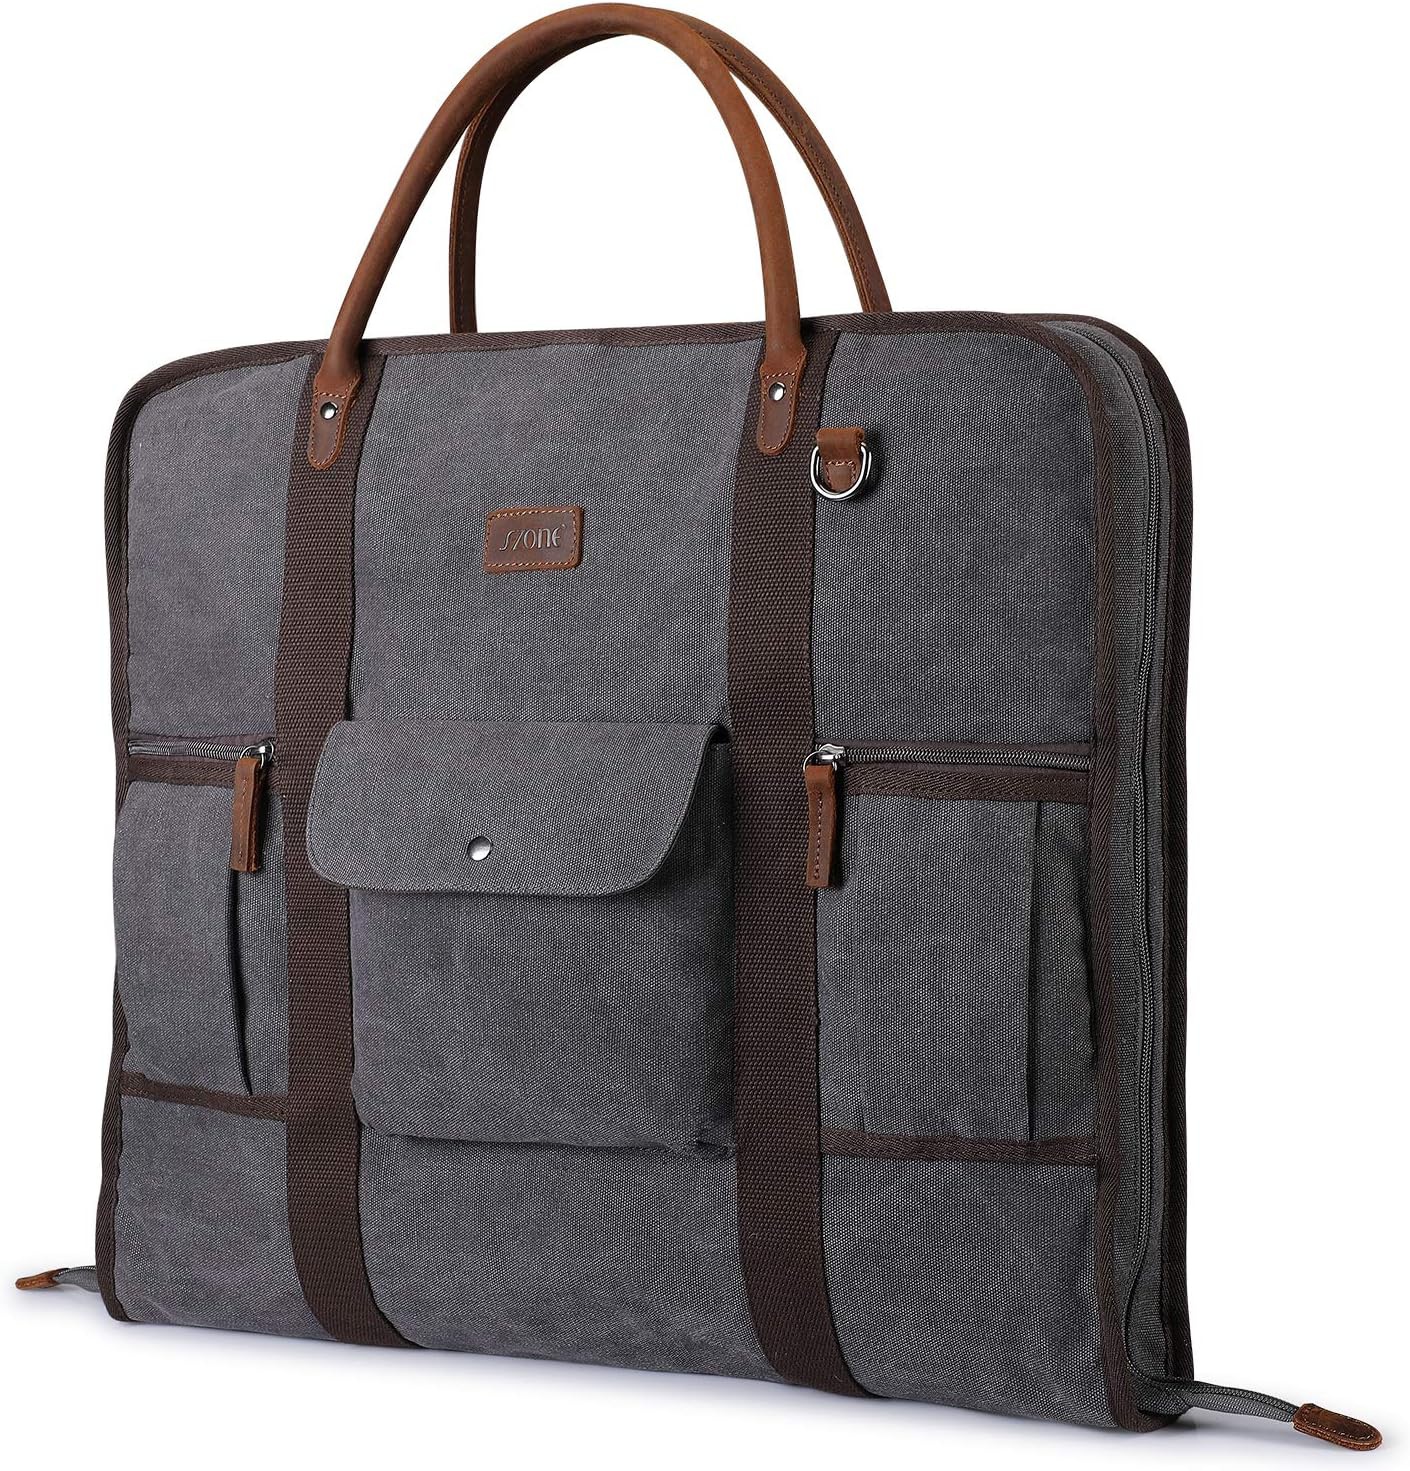 Grey Canvas Carry-On Garment Bag with Genuine Leather Trim for Business Trips...